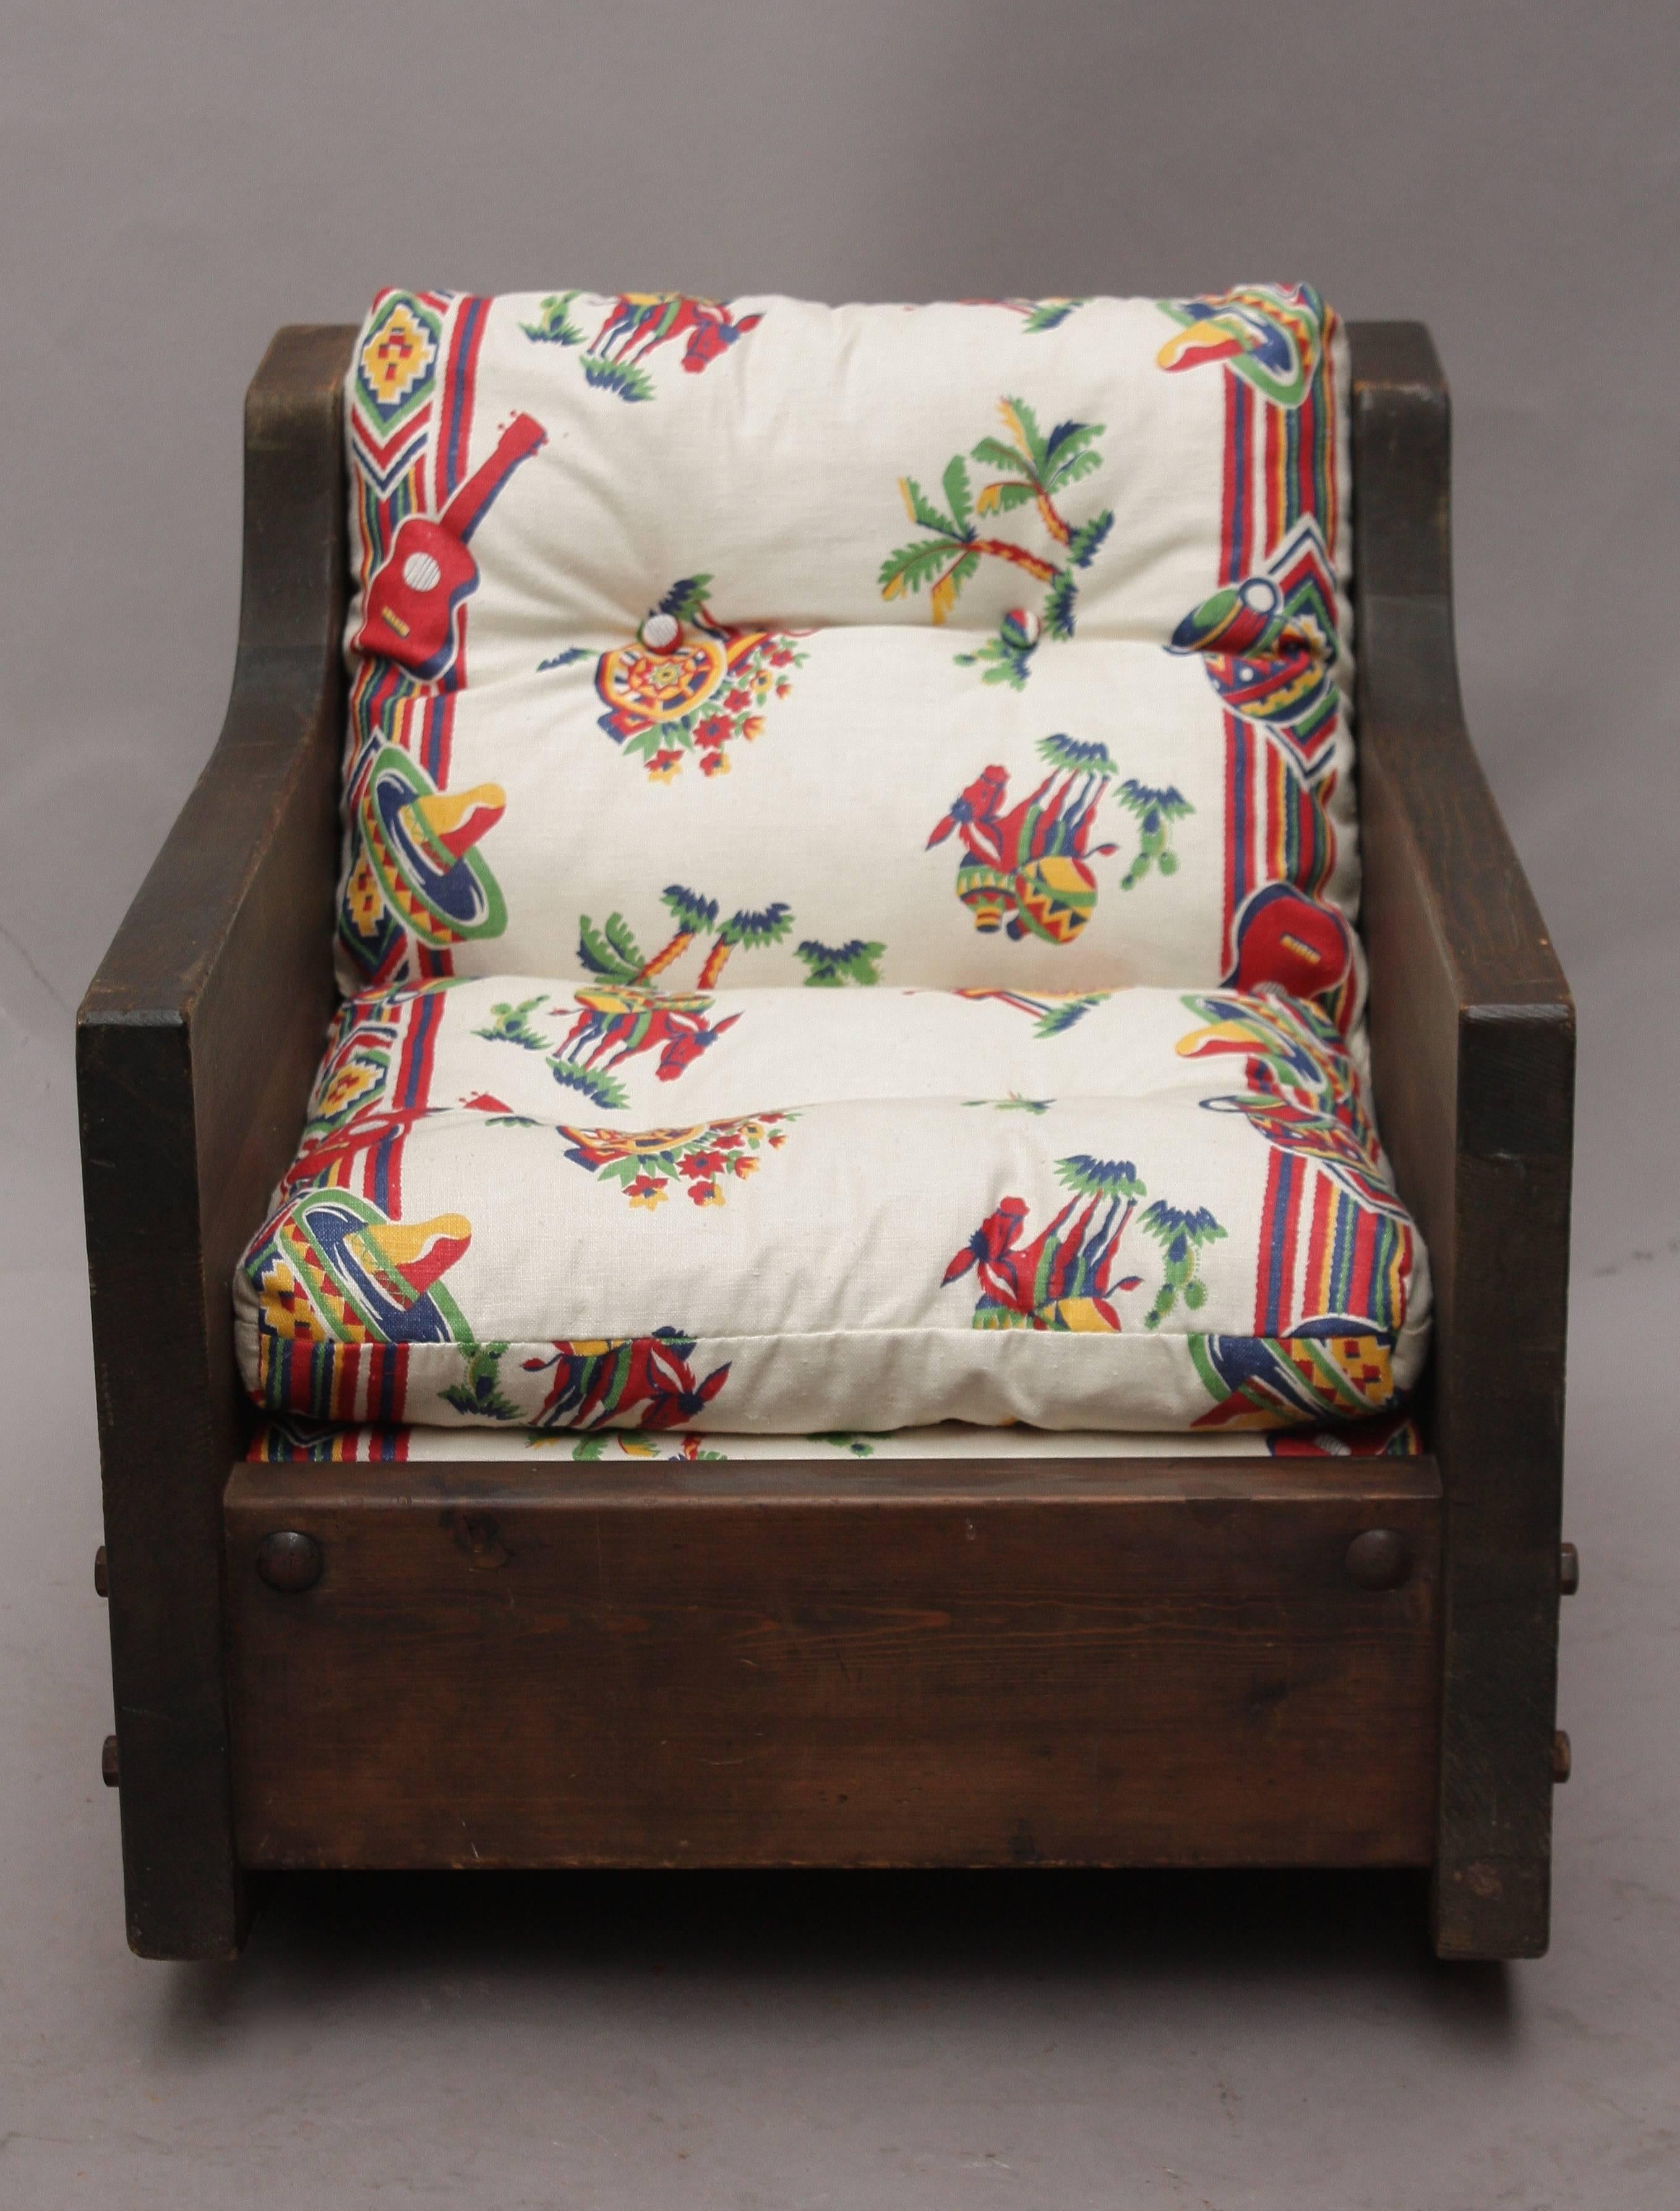 Sweet child's rocker from the turn of the 1930s century with new upholstery. Measures: 17